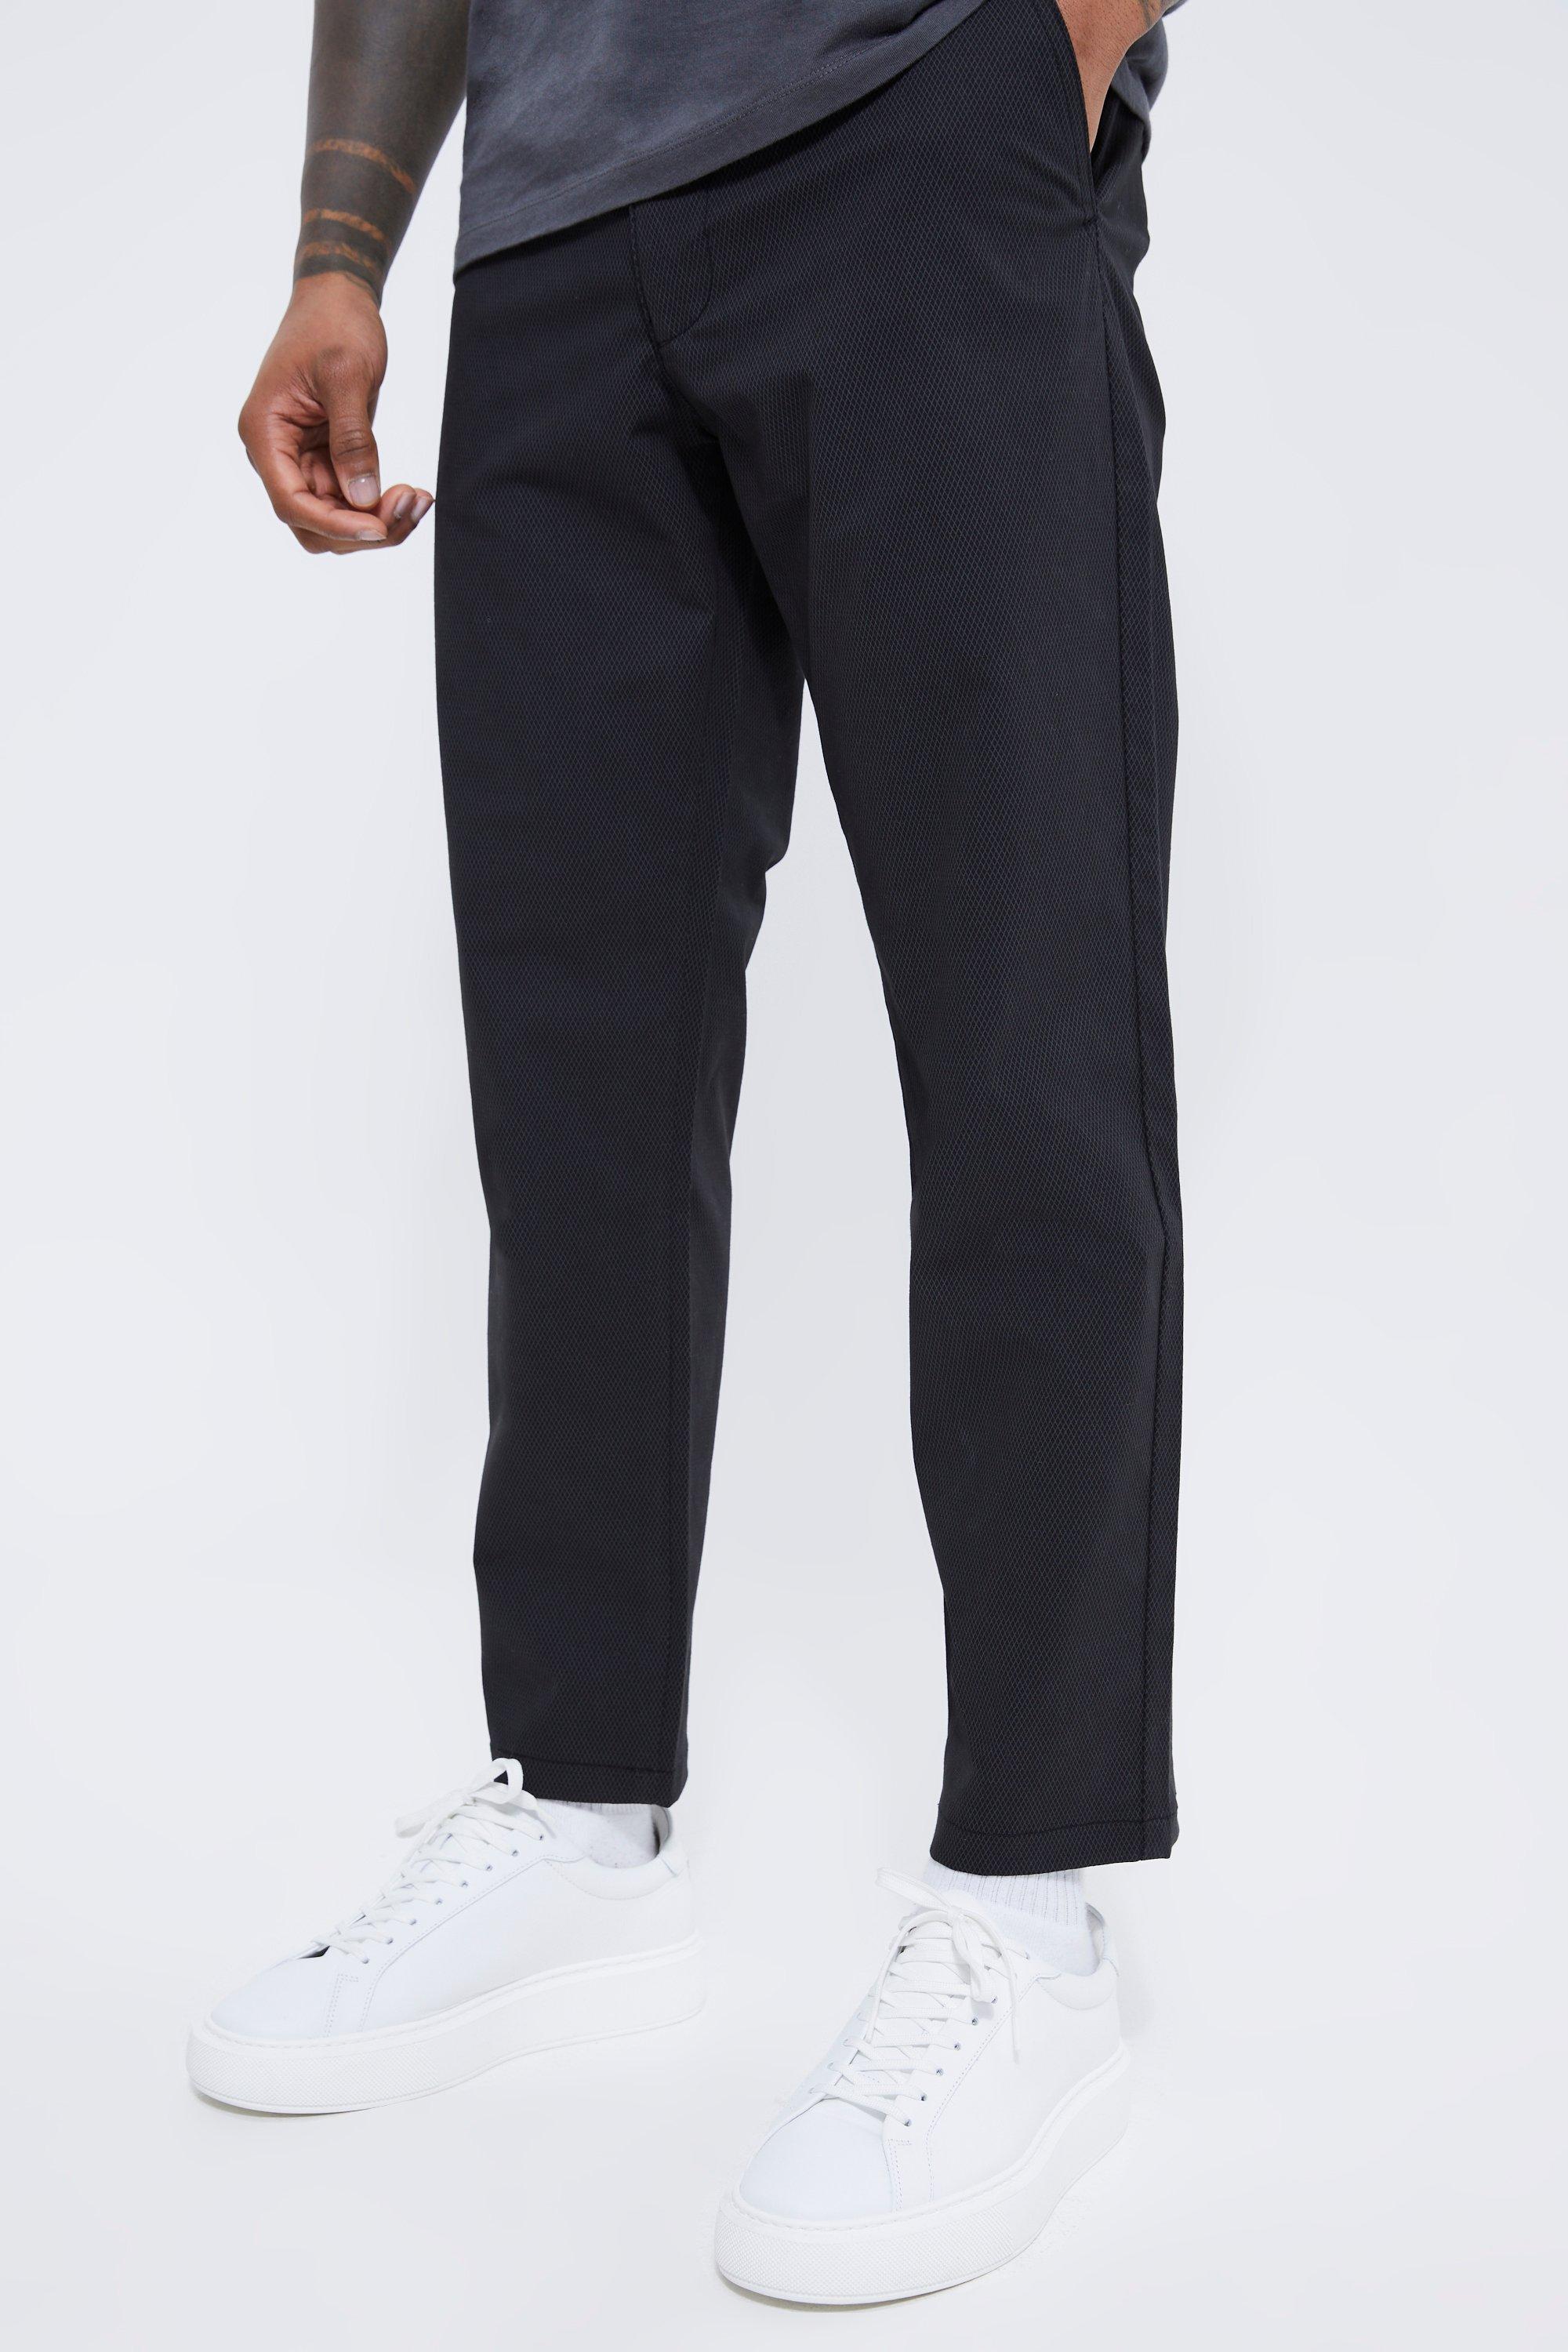 Mens Black Fixed Waist Slim Fit Cropped Chino Trousers, Black